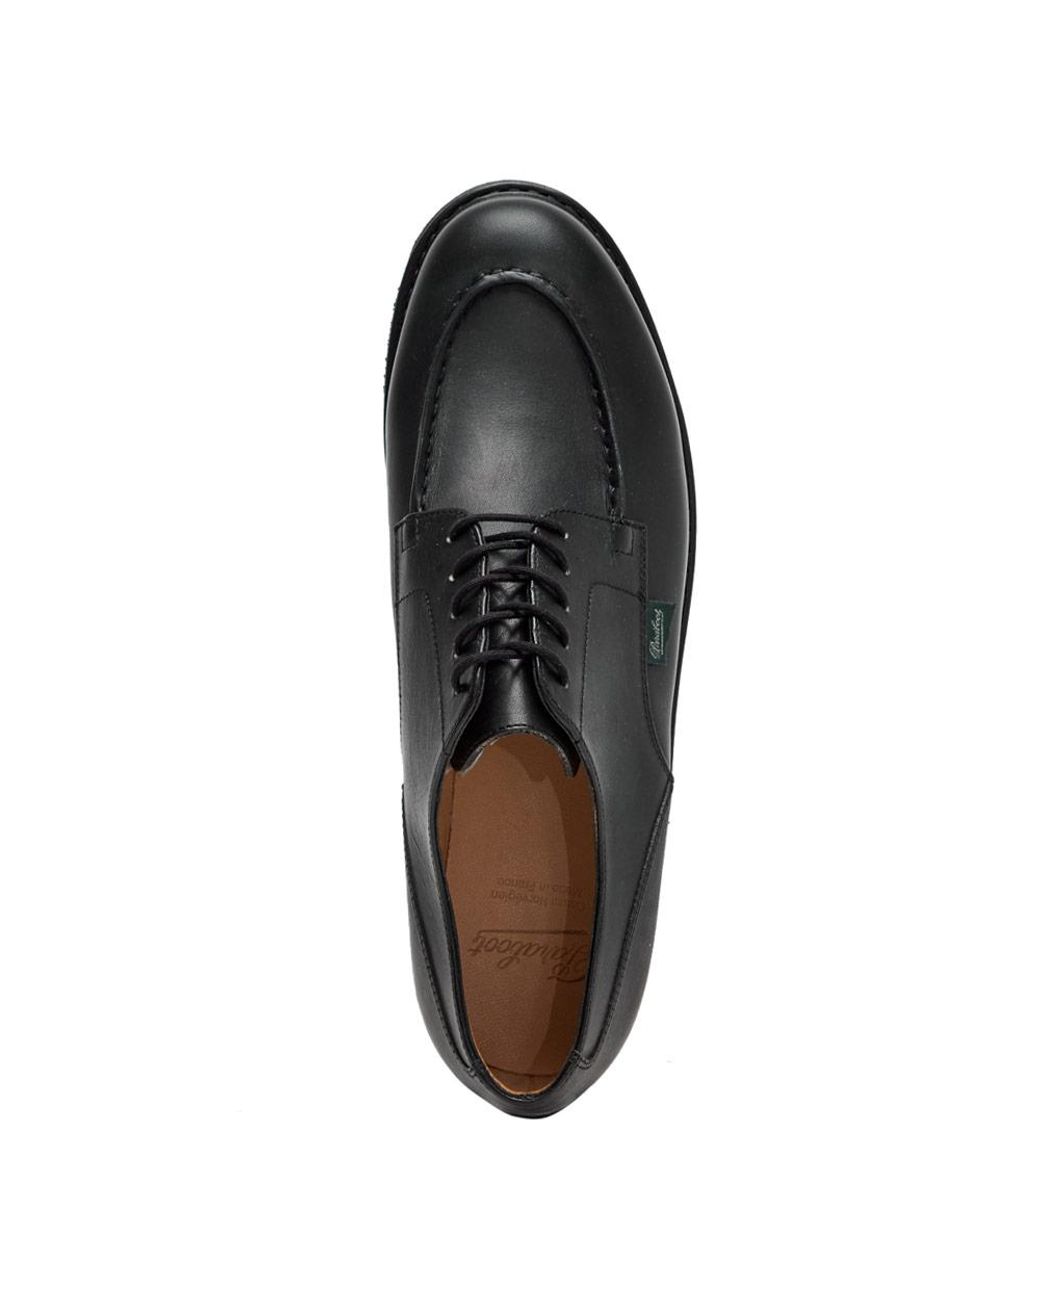 Paraboot Leather Chambord Shoes in Black/Black (Black) for Men - Save 62% |  Lyst